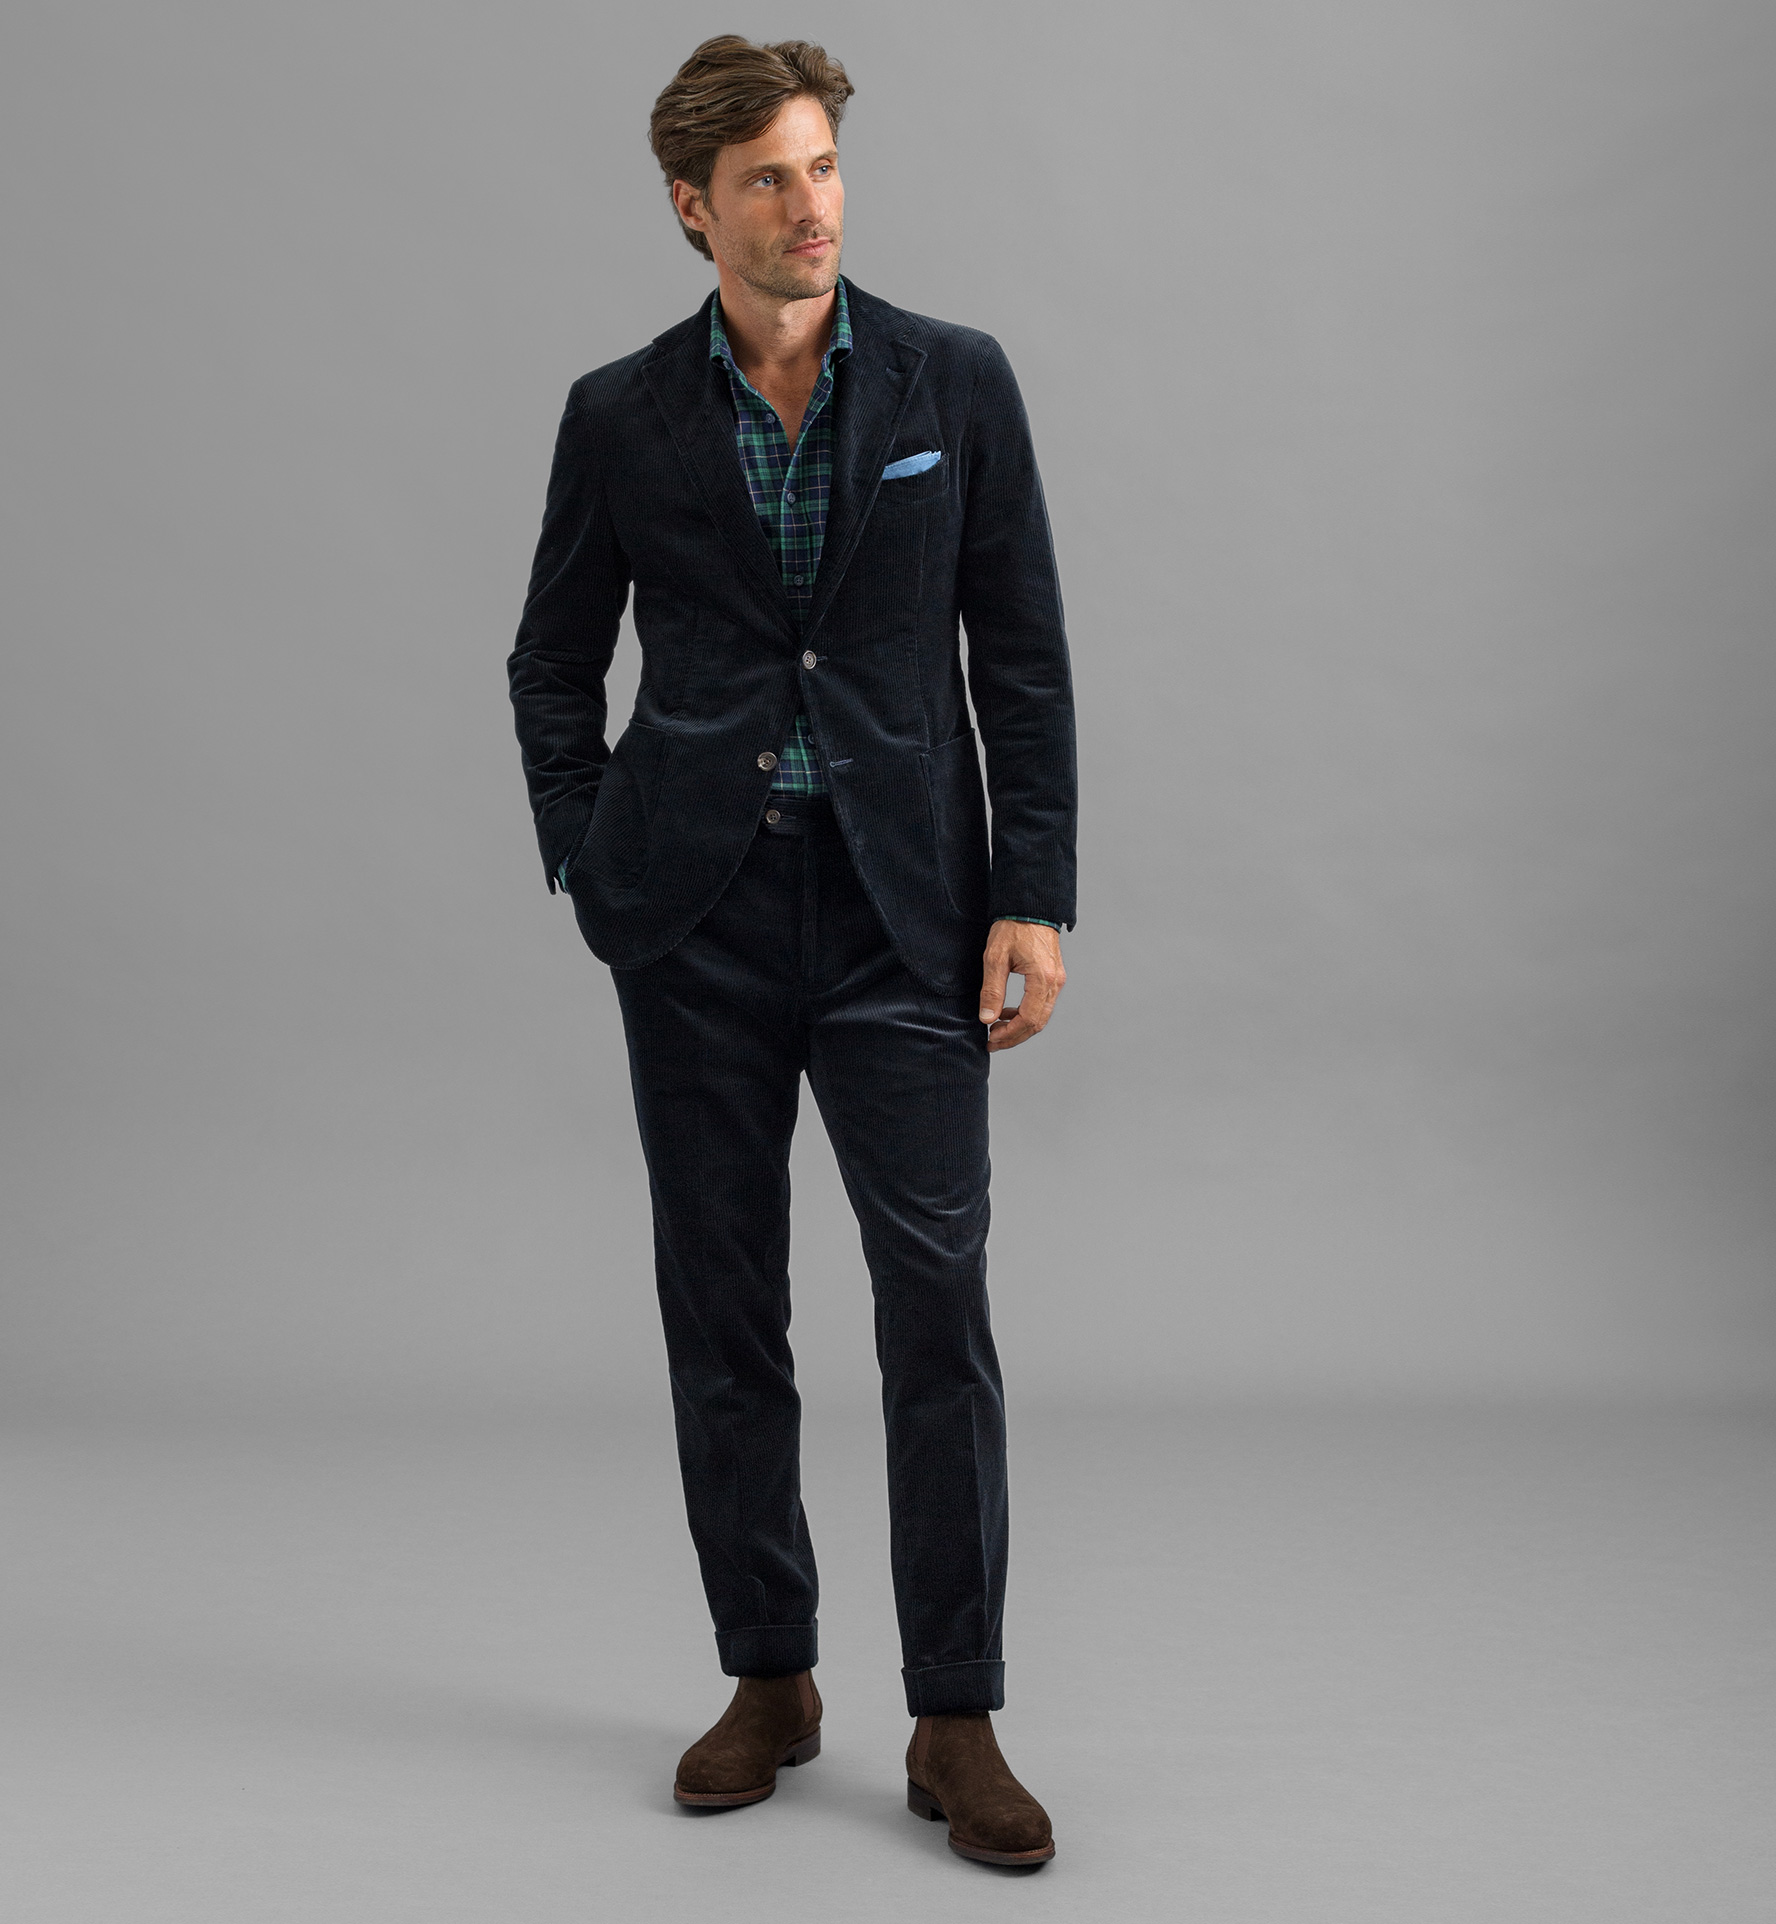 Waverly Navy Wide Wale Corduroy Suit - Custom Fit Tailored Clothing